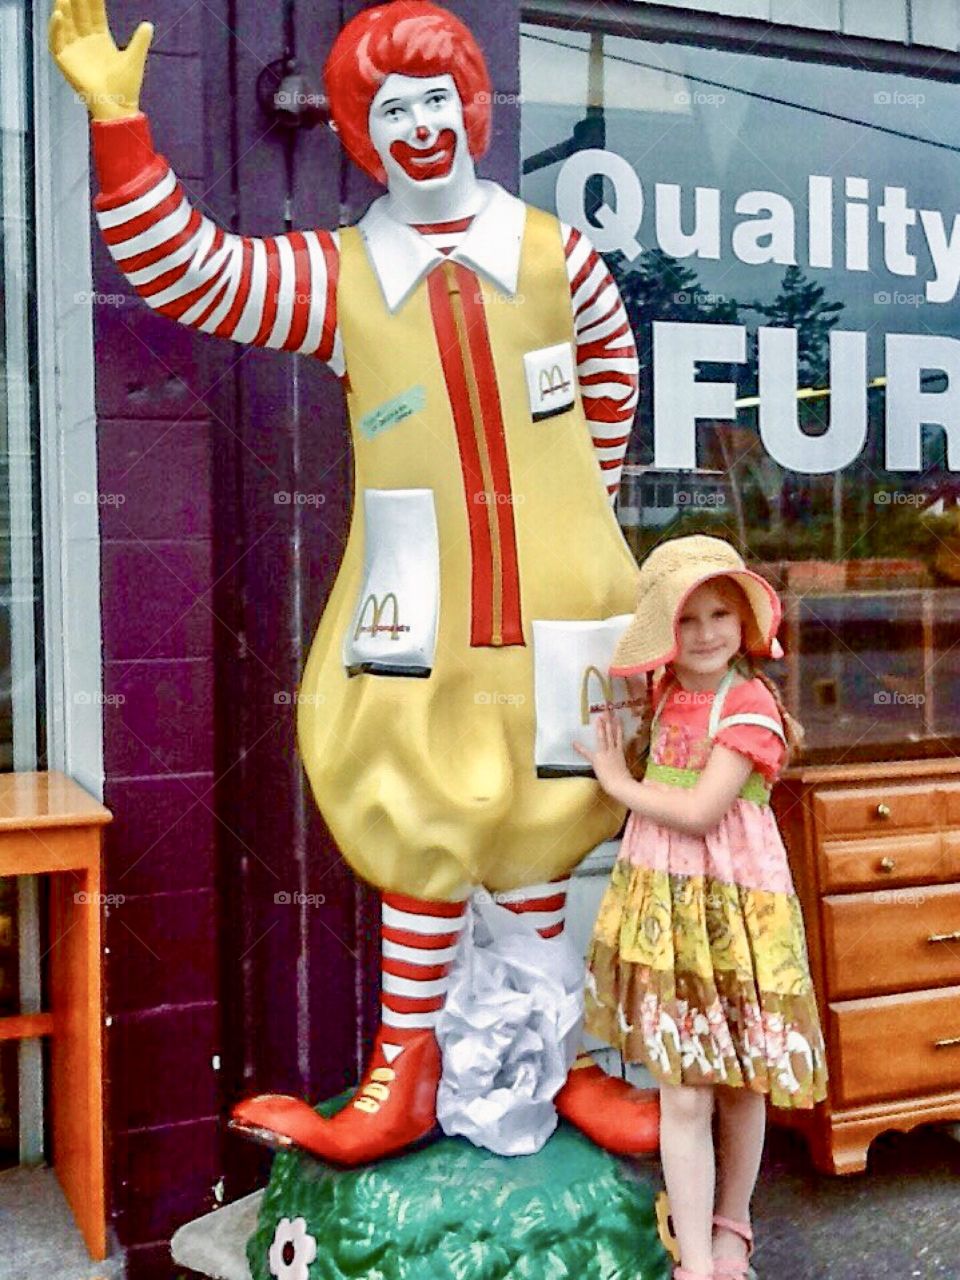 Retro Ronald McDonald statue for sale at second-hand store 